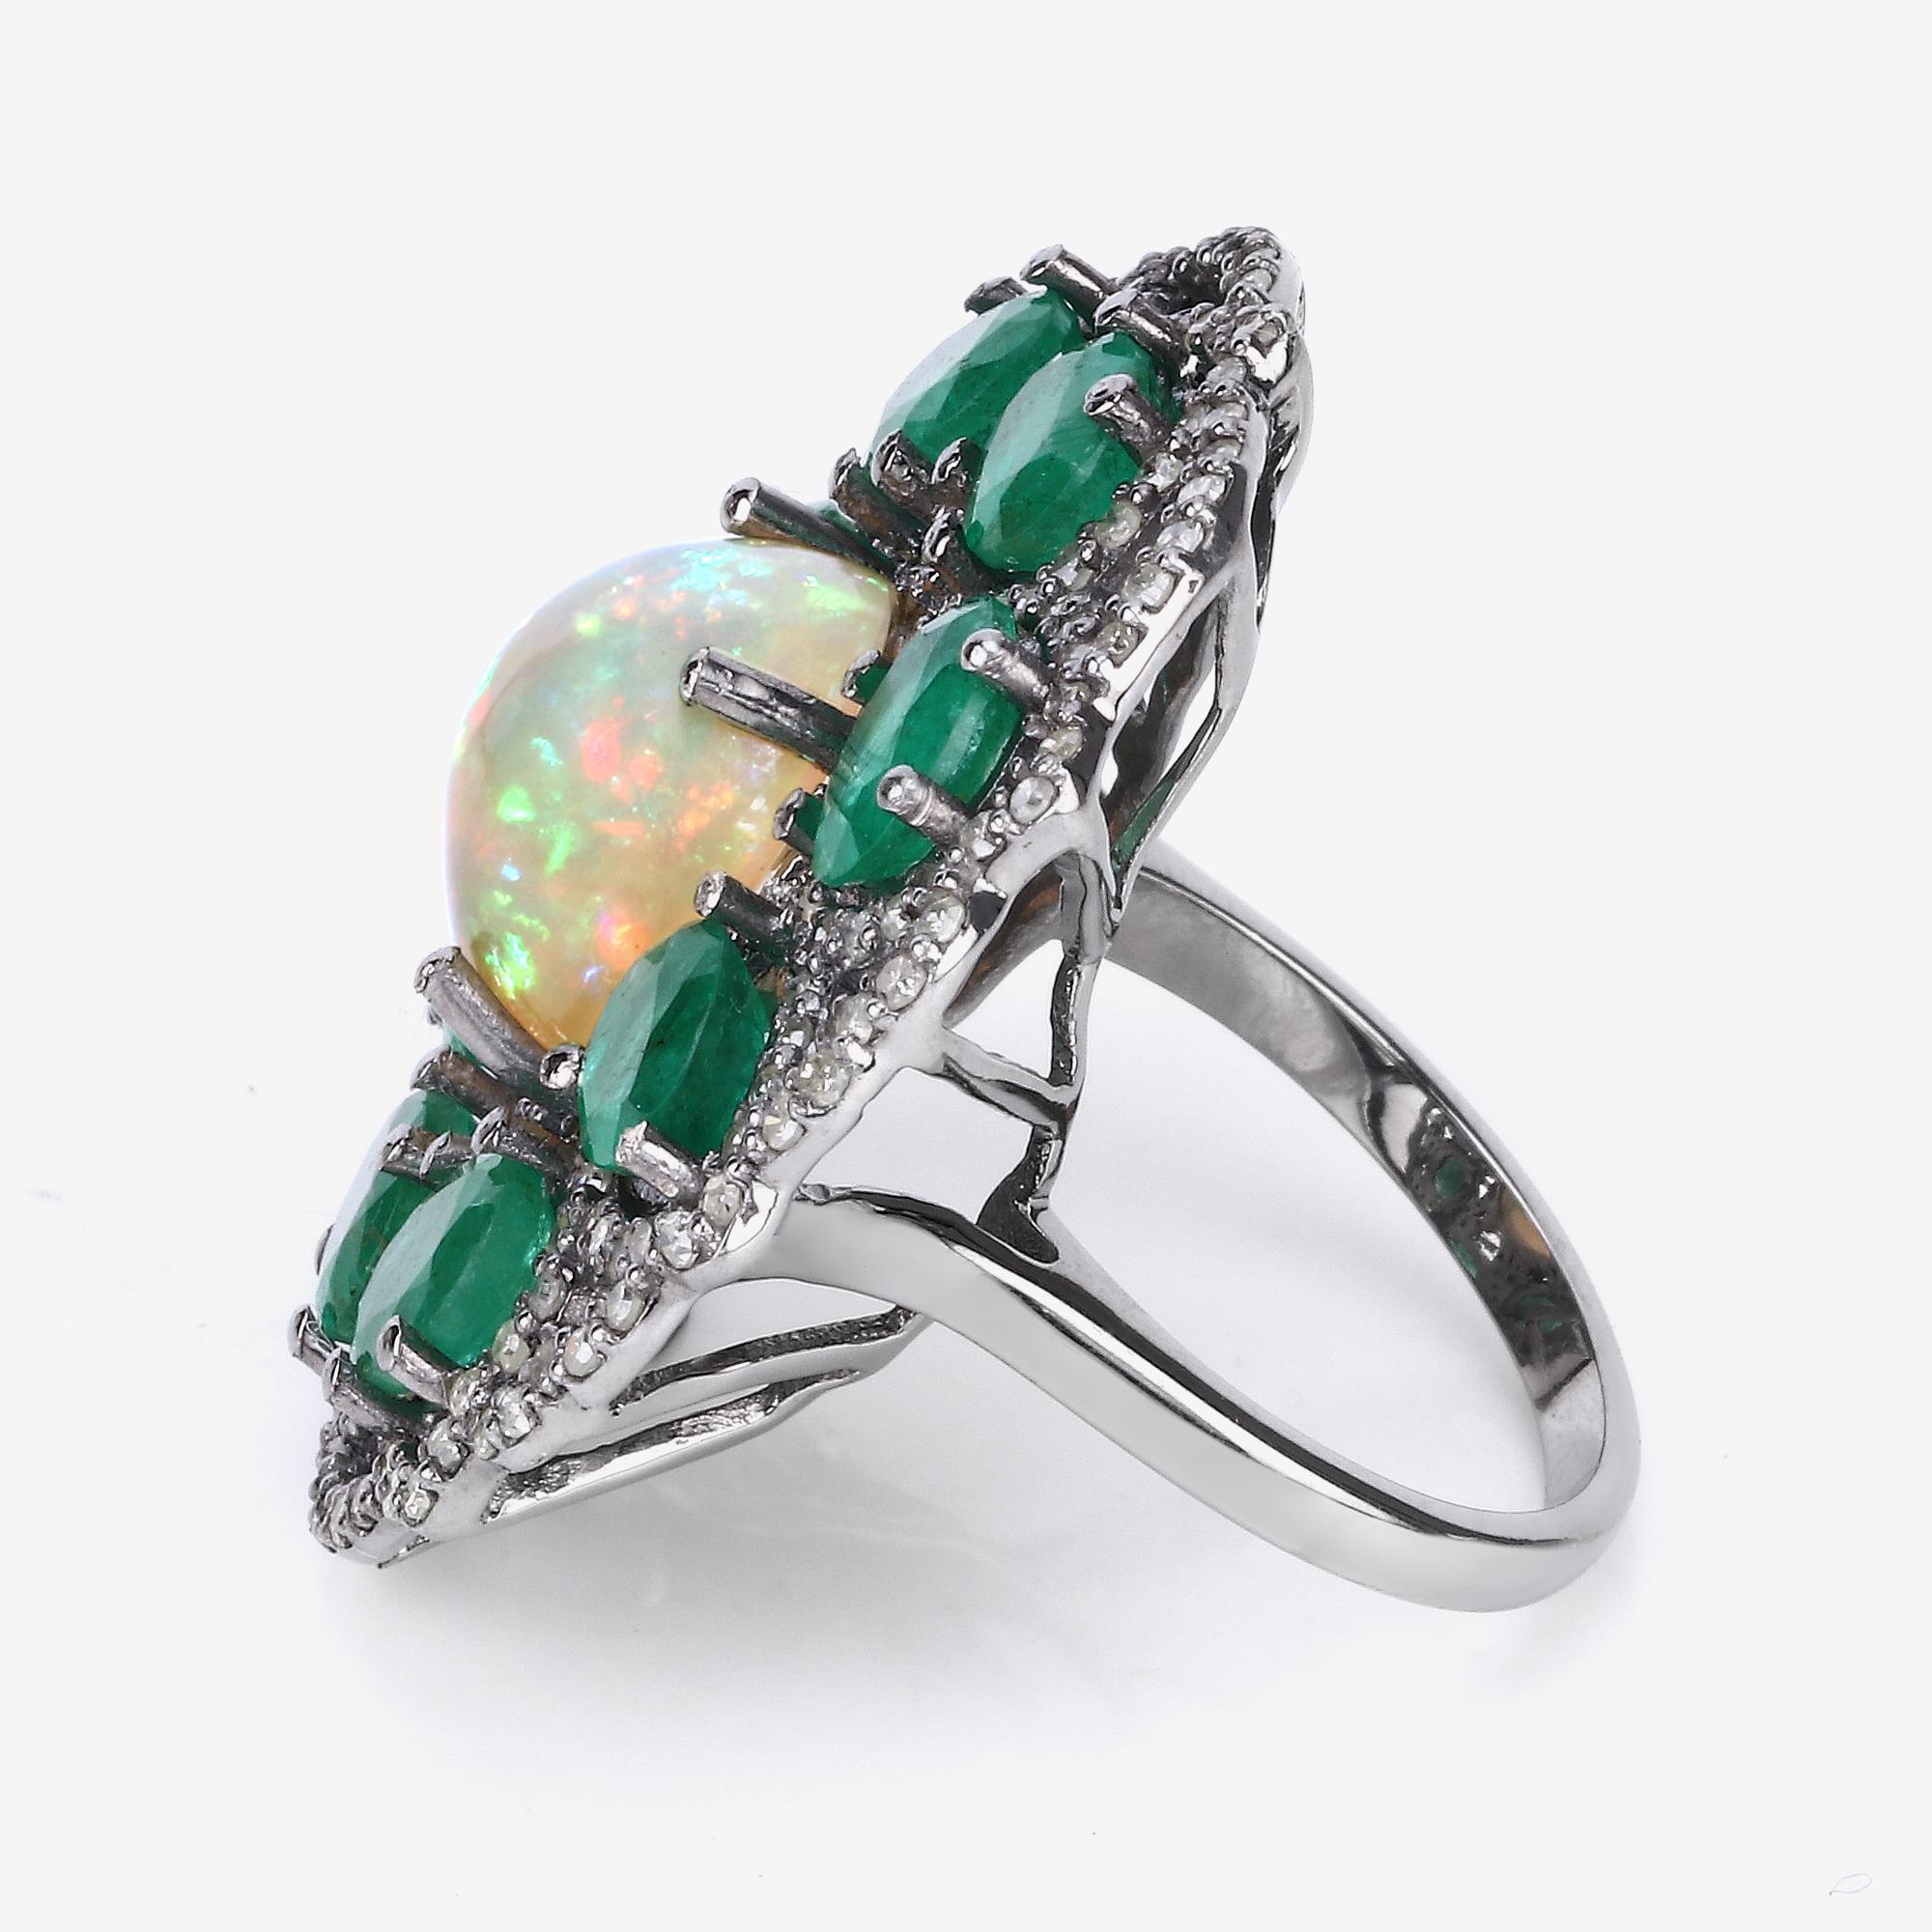 Victorian 9.80cttw Ethiopian Opal, Emerald with Diamonds 1.31cttw Sterling Silver Ring For Sale